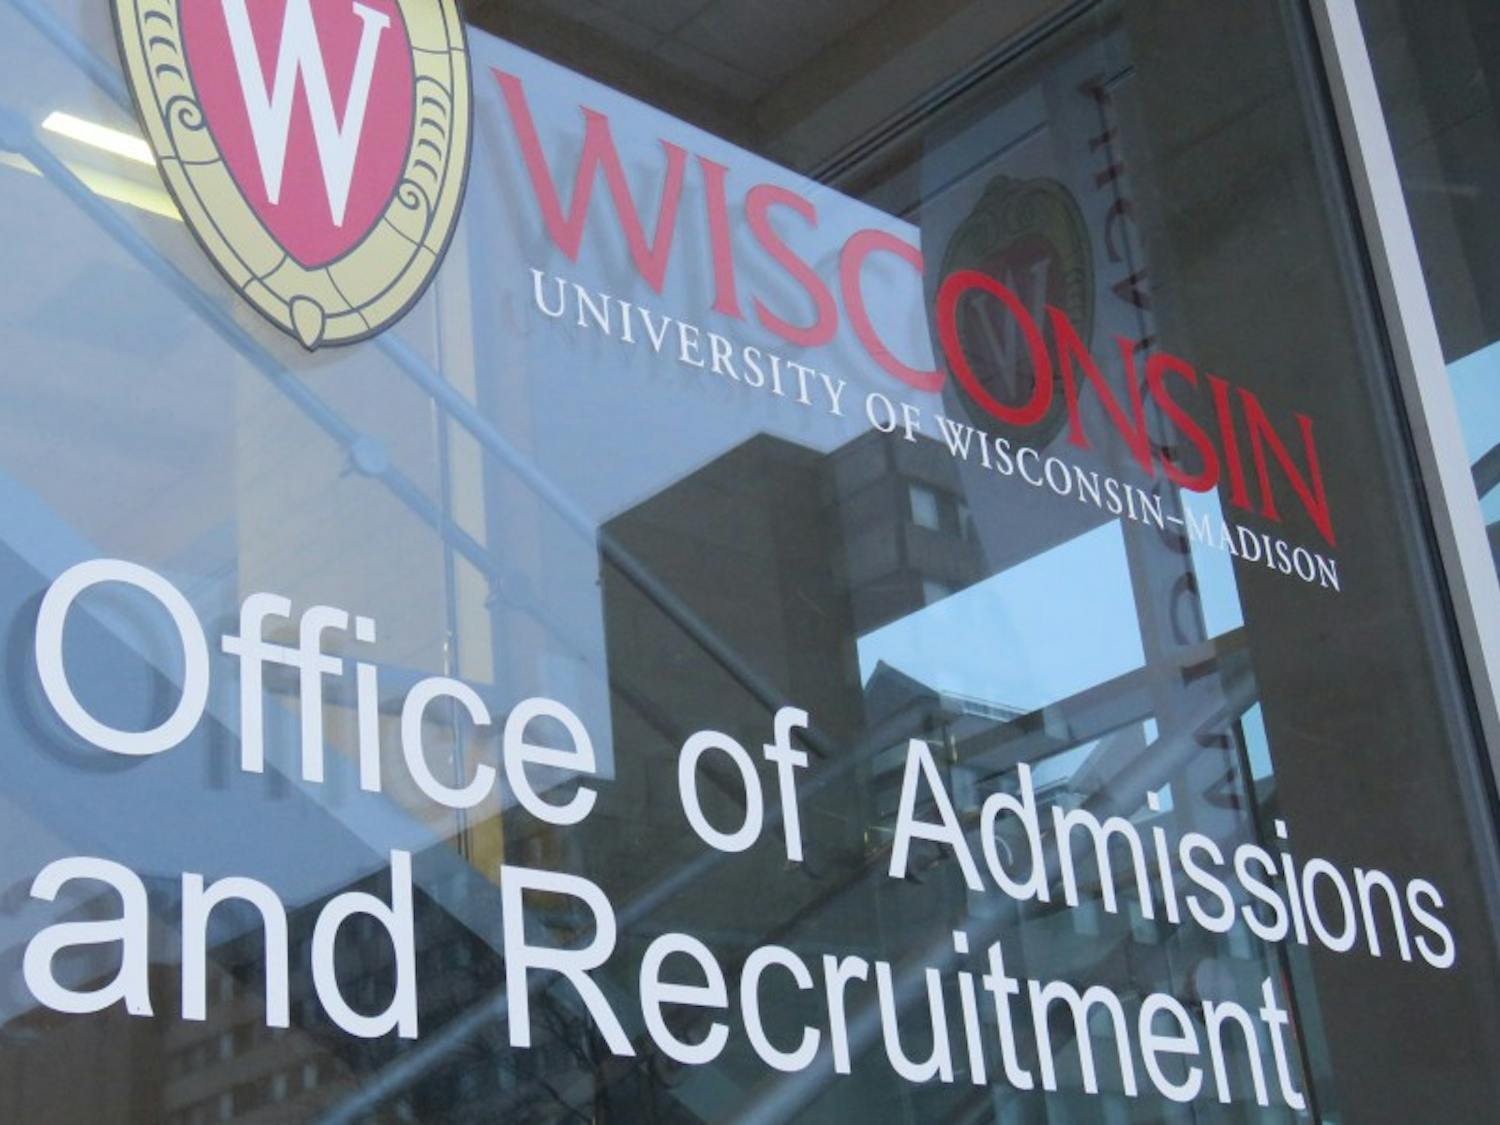 UW-Madison's class of 2021 consists of 6,610 students, the largest class in school history.